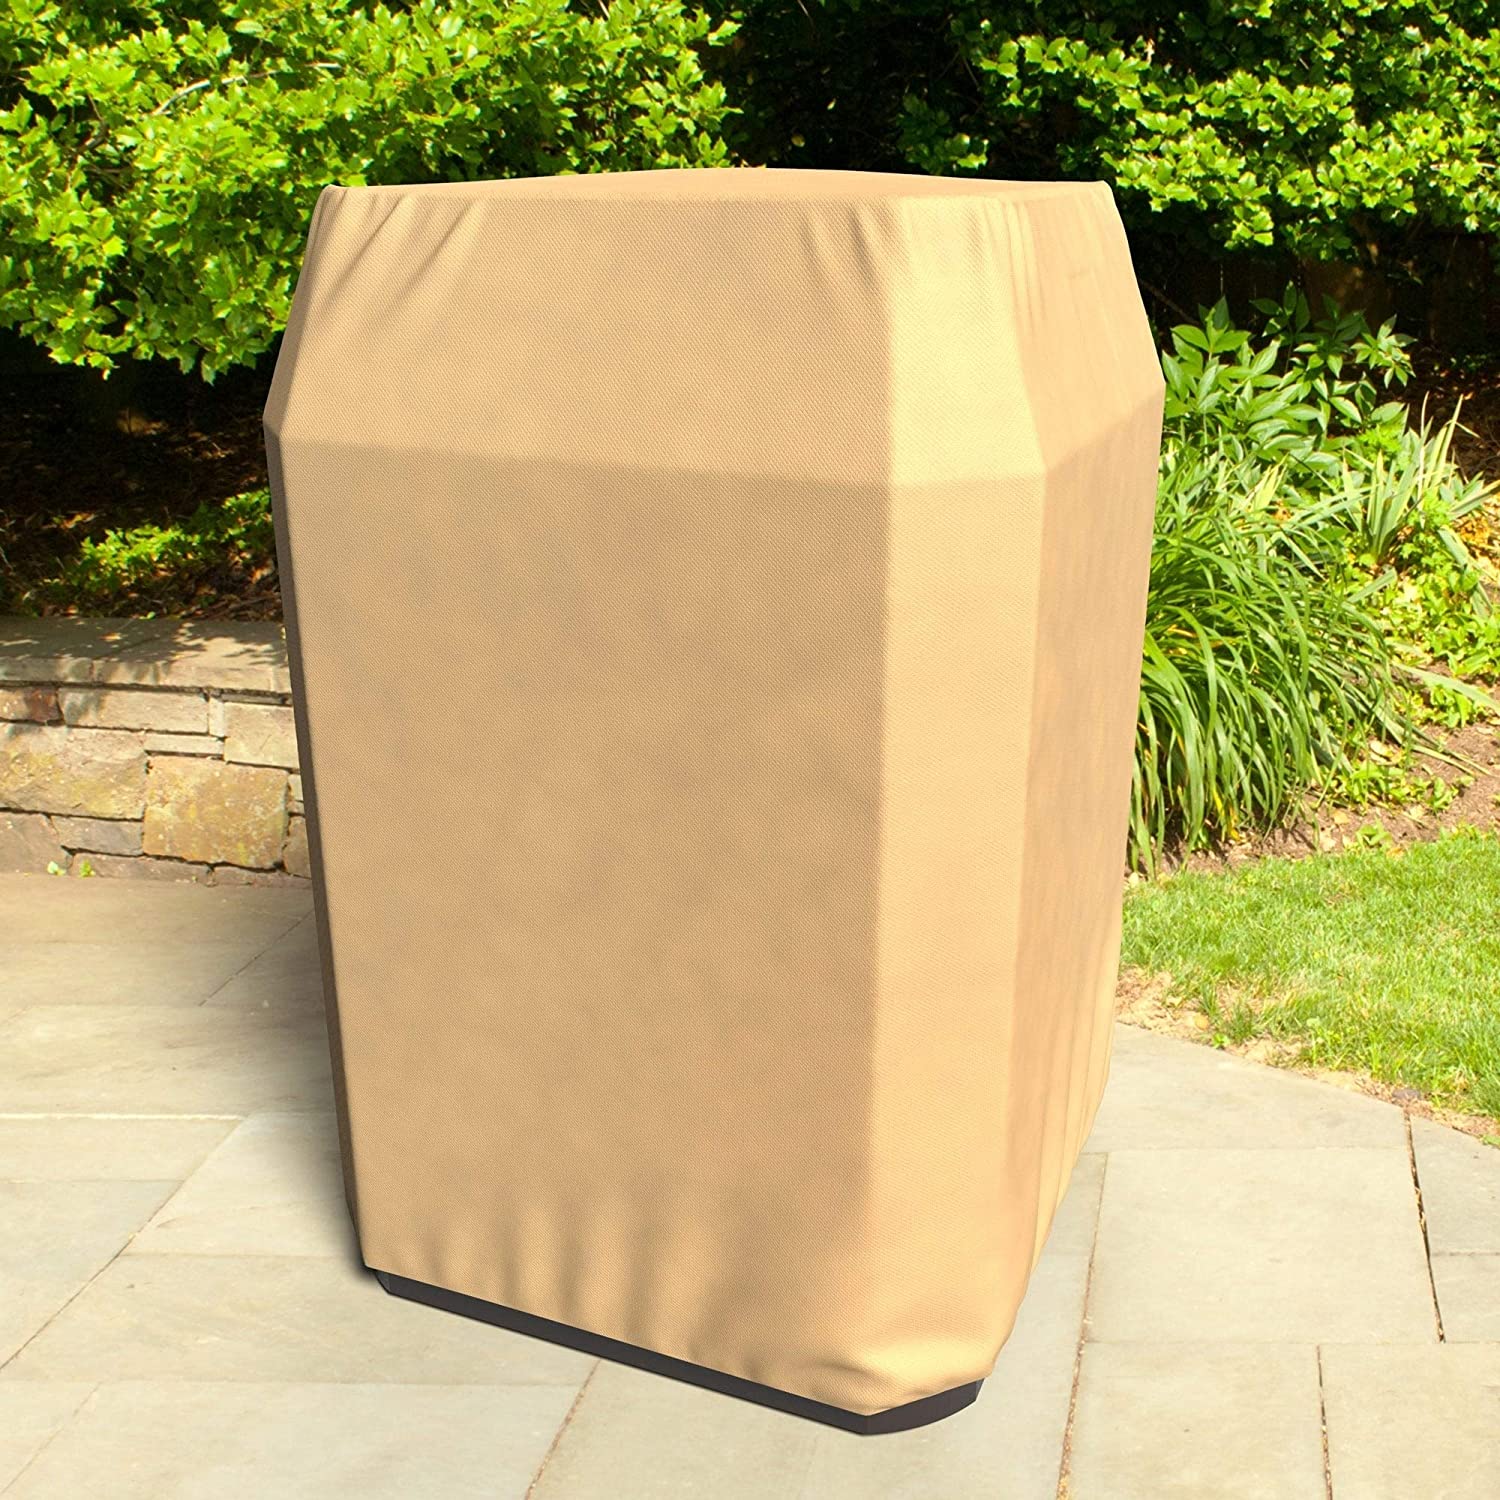 MISC Water Resistant Ac Cover All Seasons Nutmeg Square 34" w X 34" l 30" h Tan Polypropylene